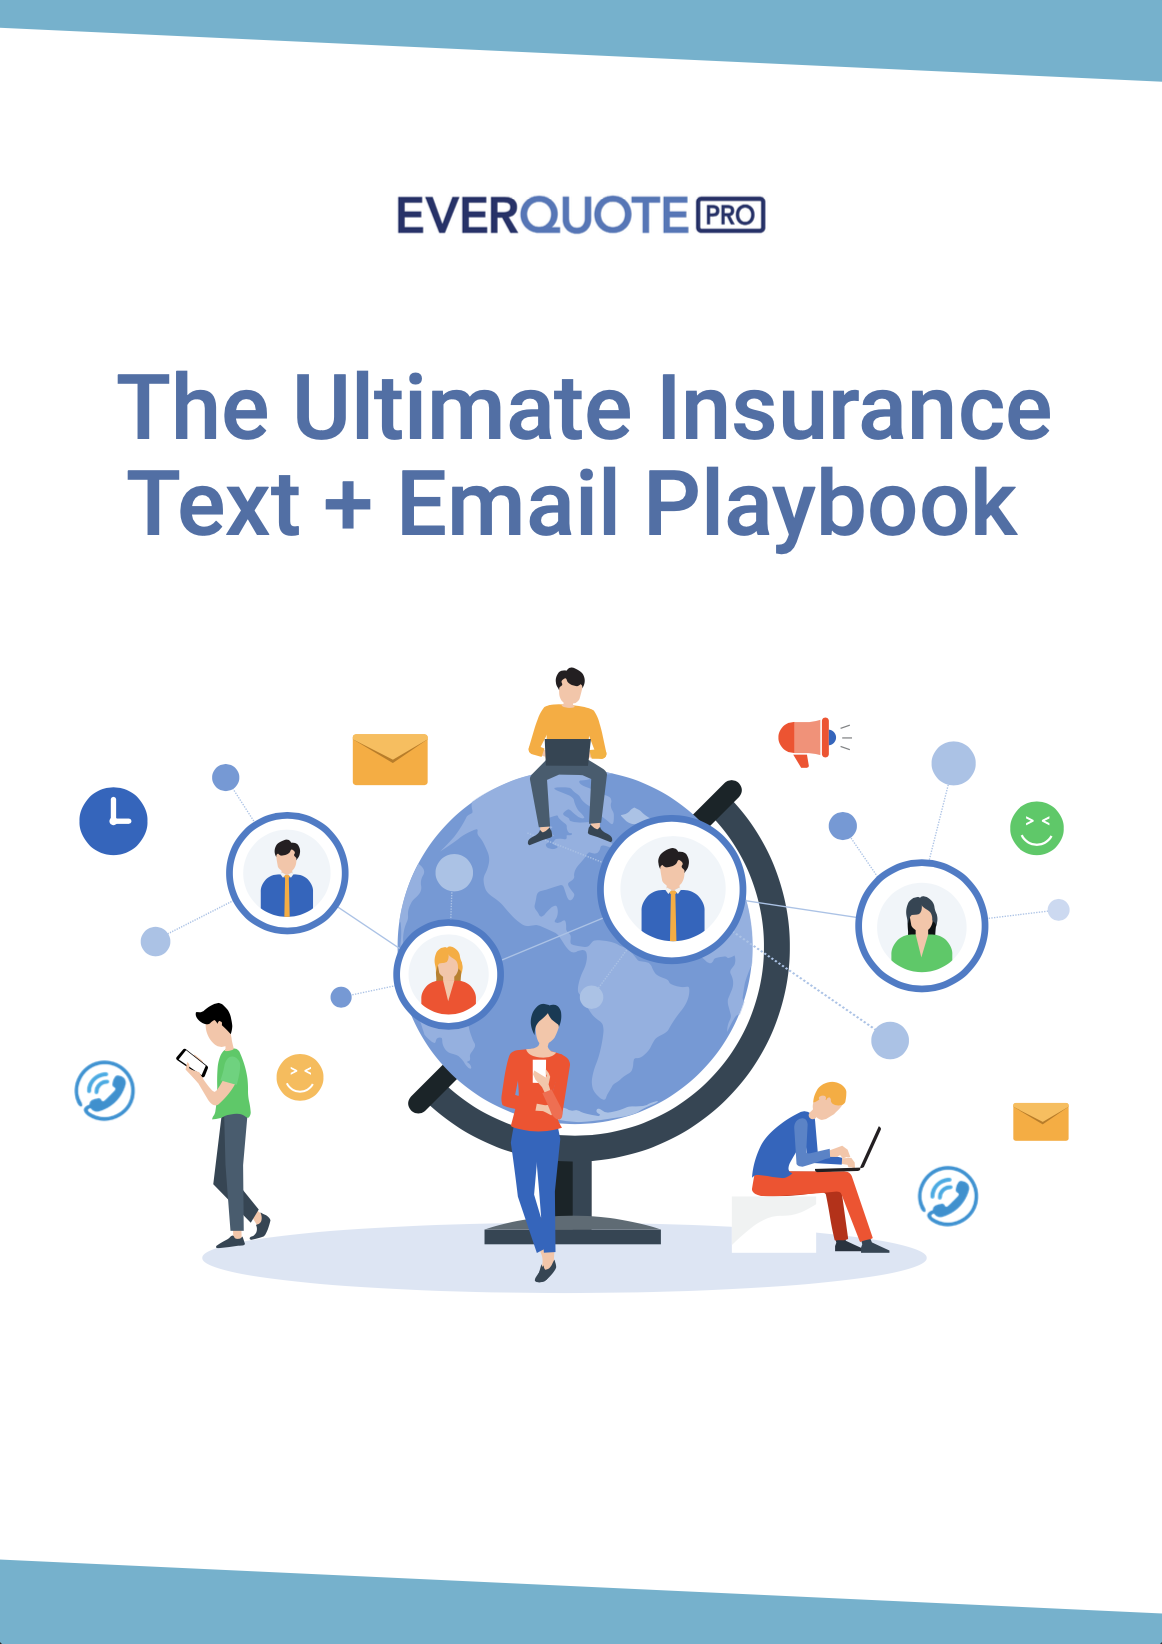 The Ultimate Insurance Text + Email Playbook